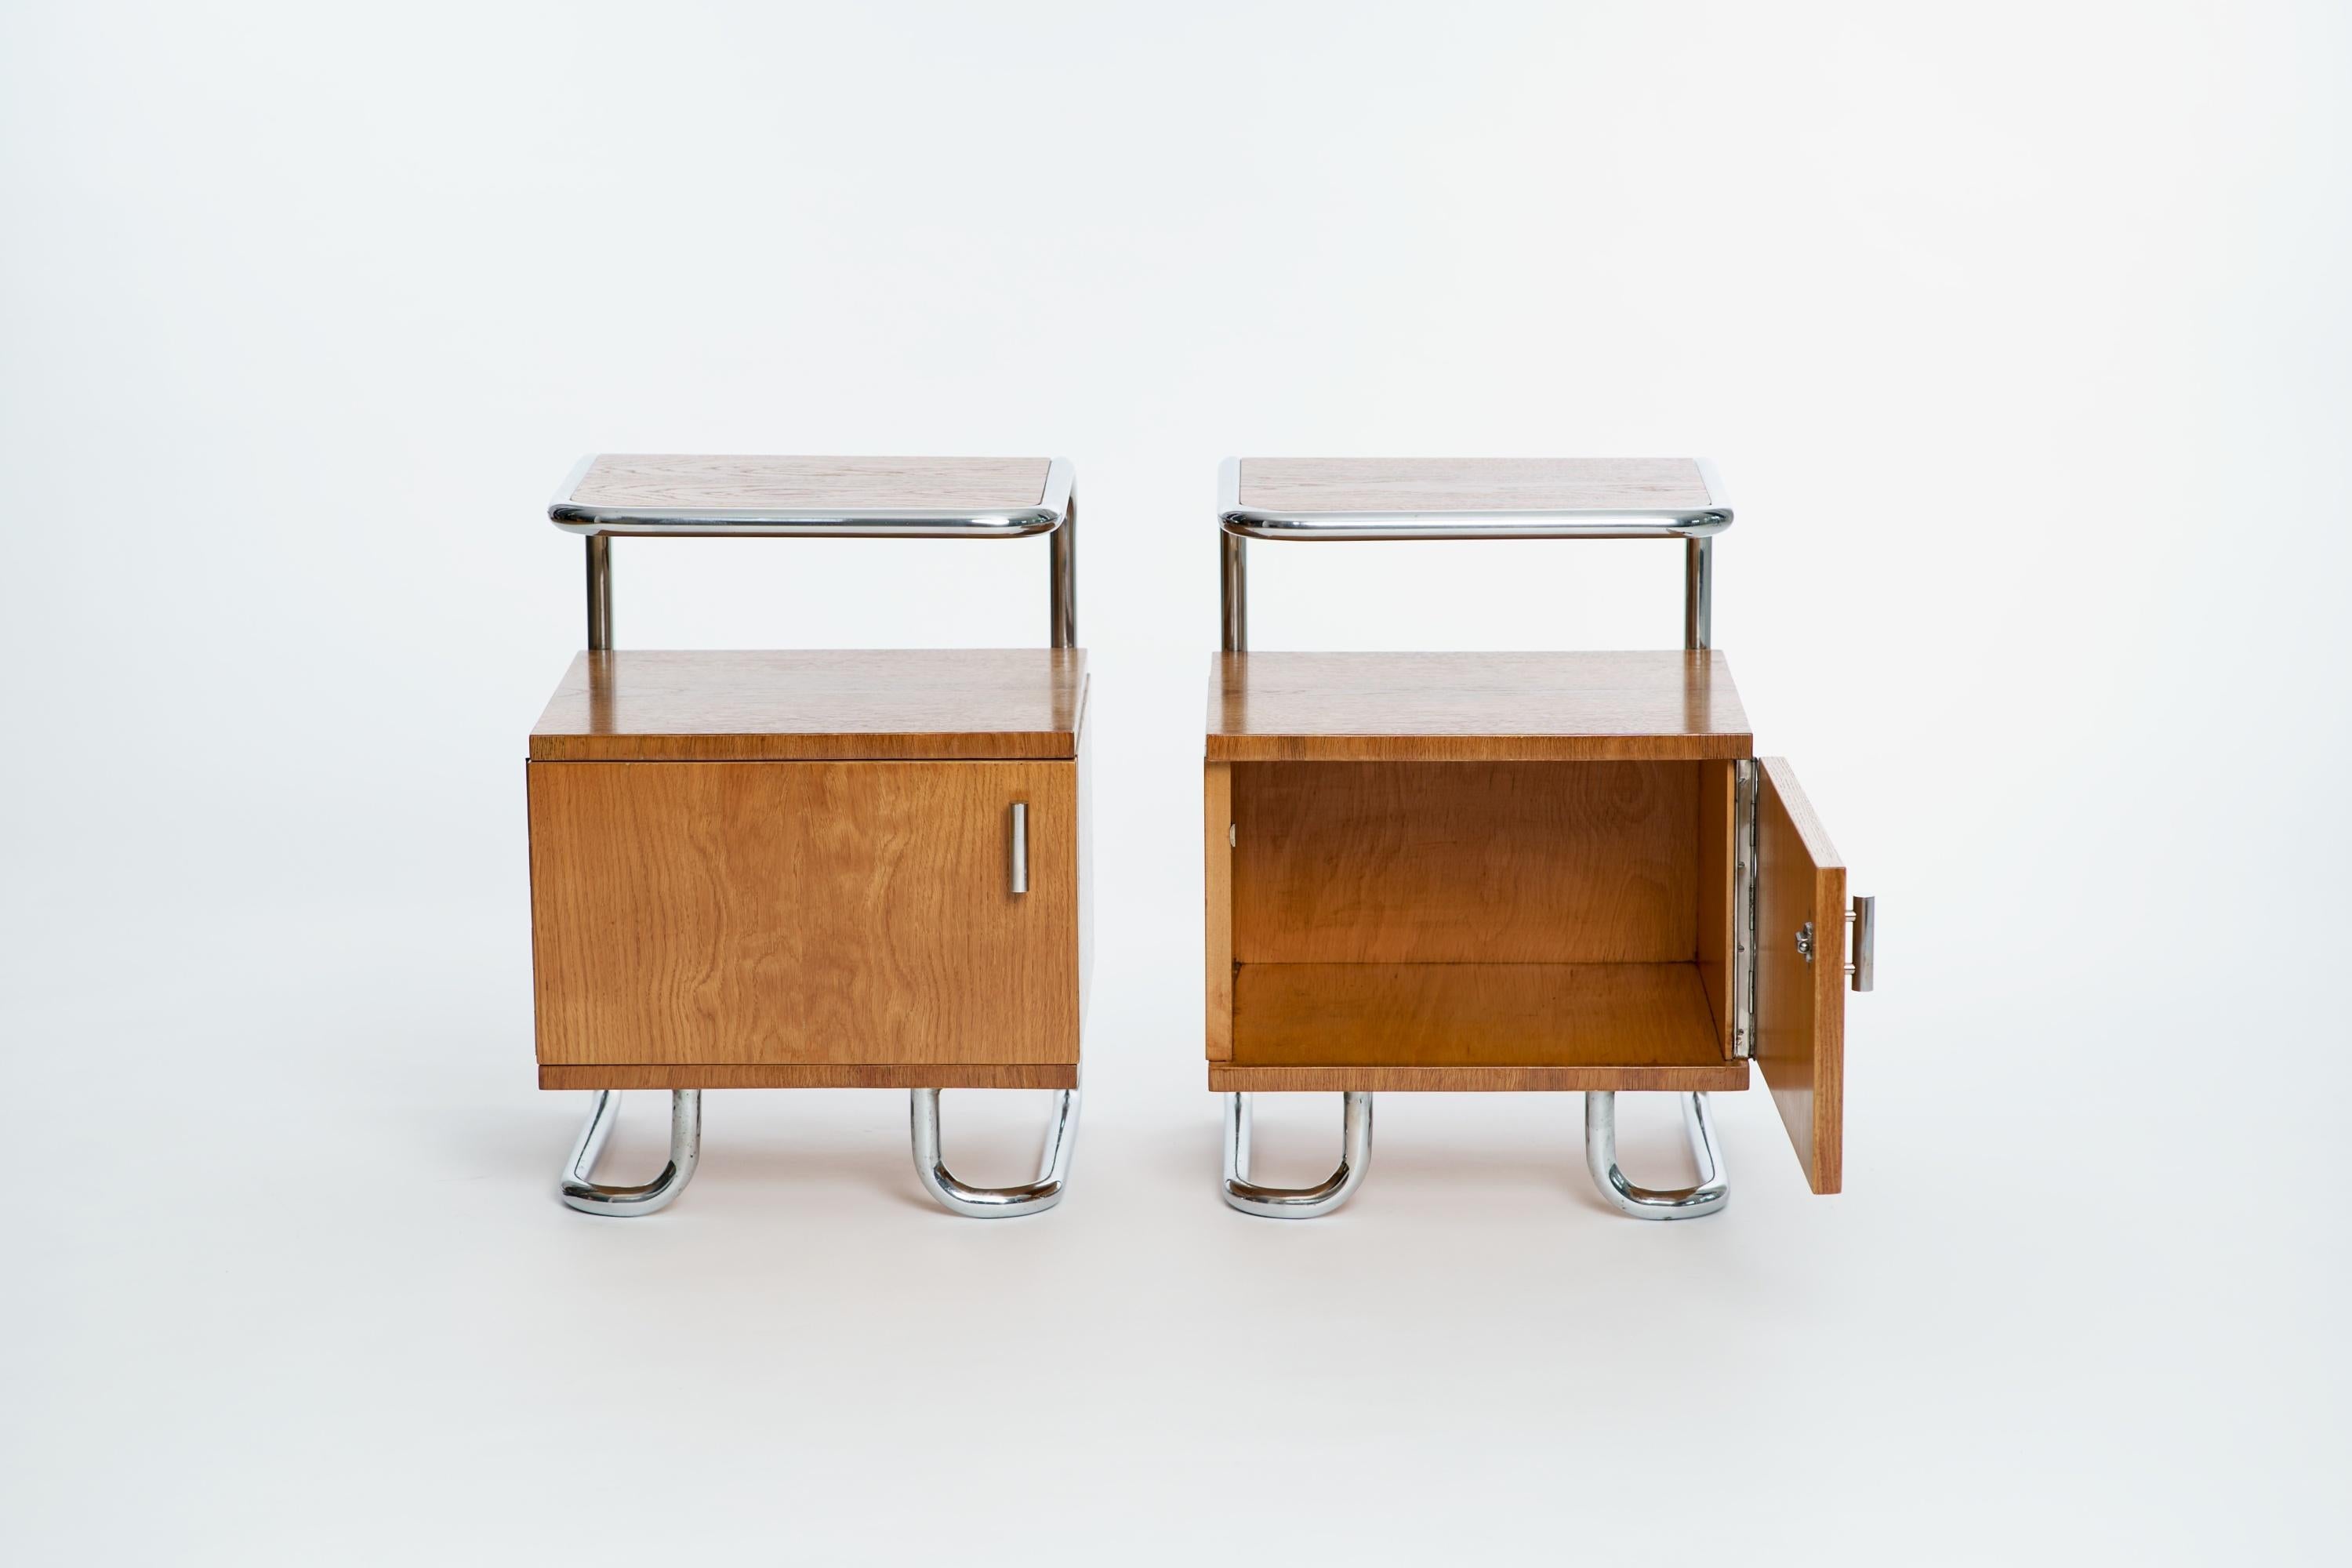 These light oak sideboards were made by Kovona in the 1930s in the former Czechoslovakia. Chromed tubular steel feet and handles in very nice original condition. The wooden parts made of oak veneer were restored.